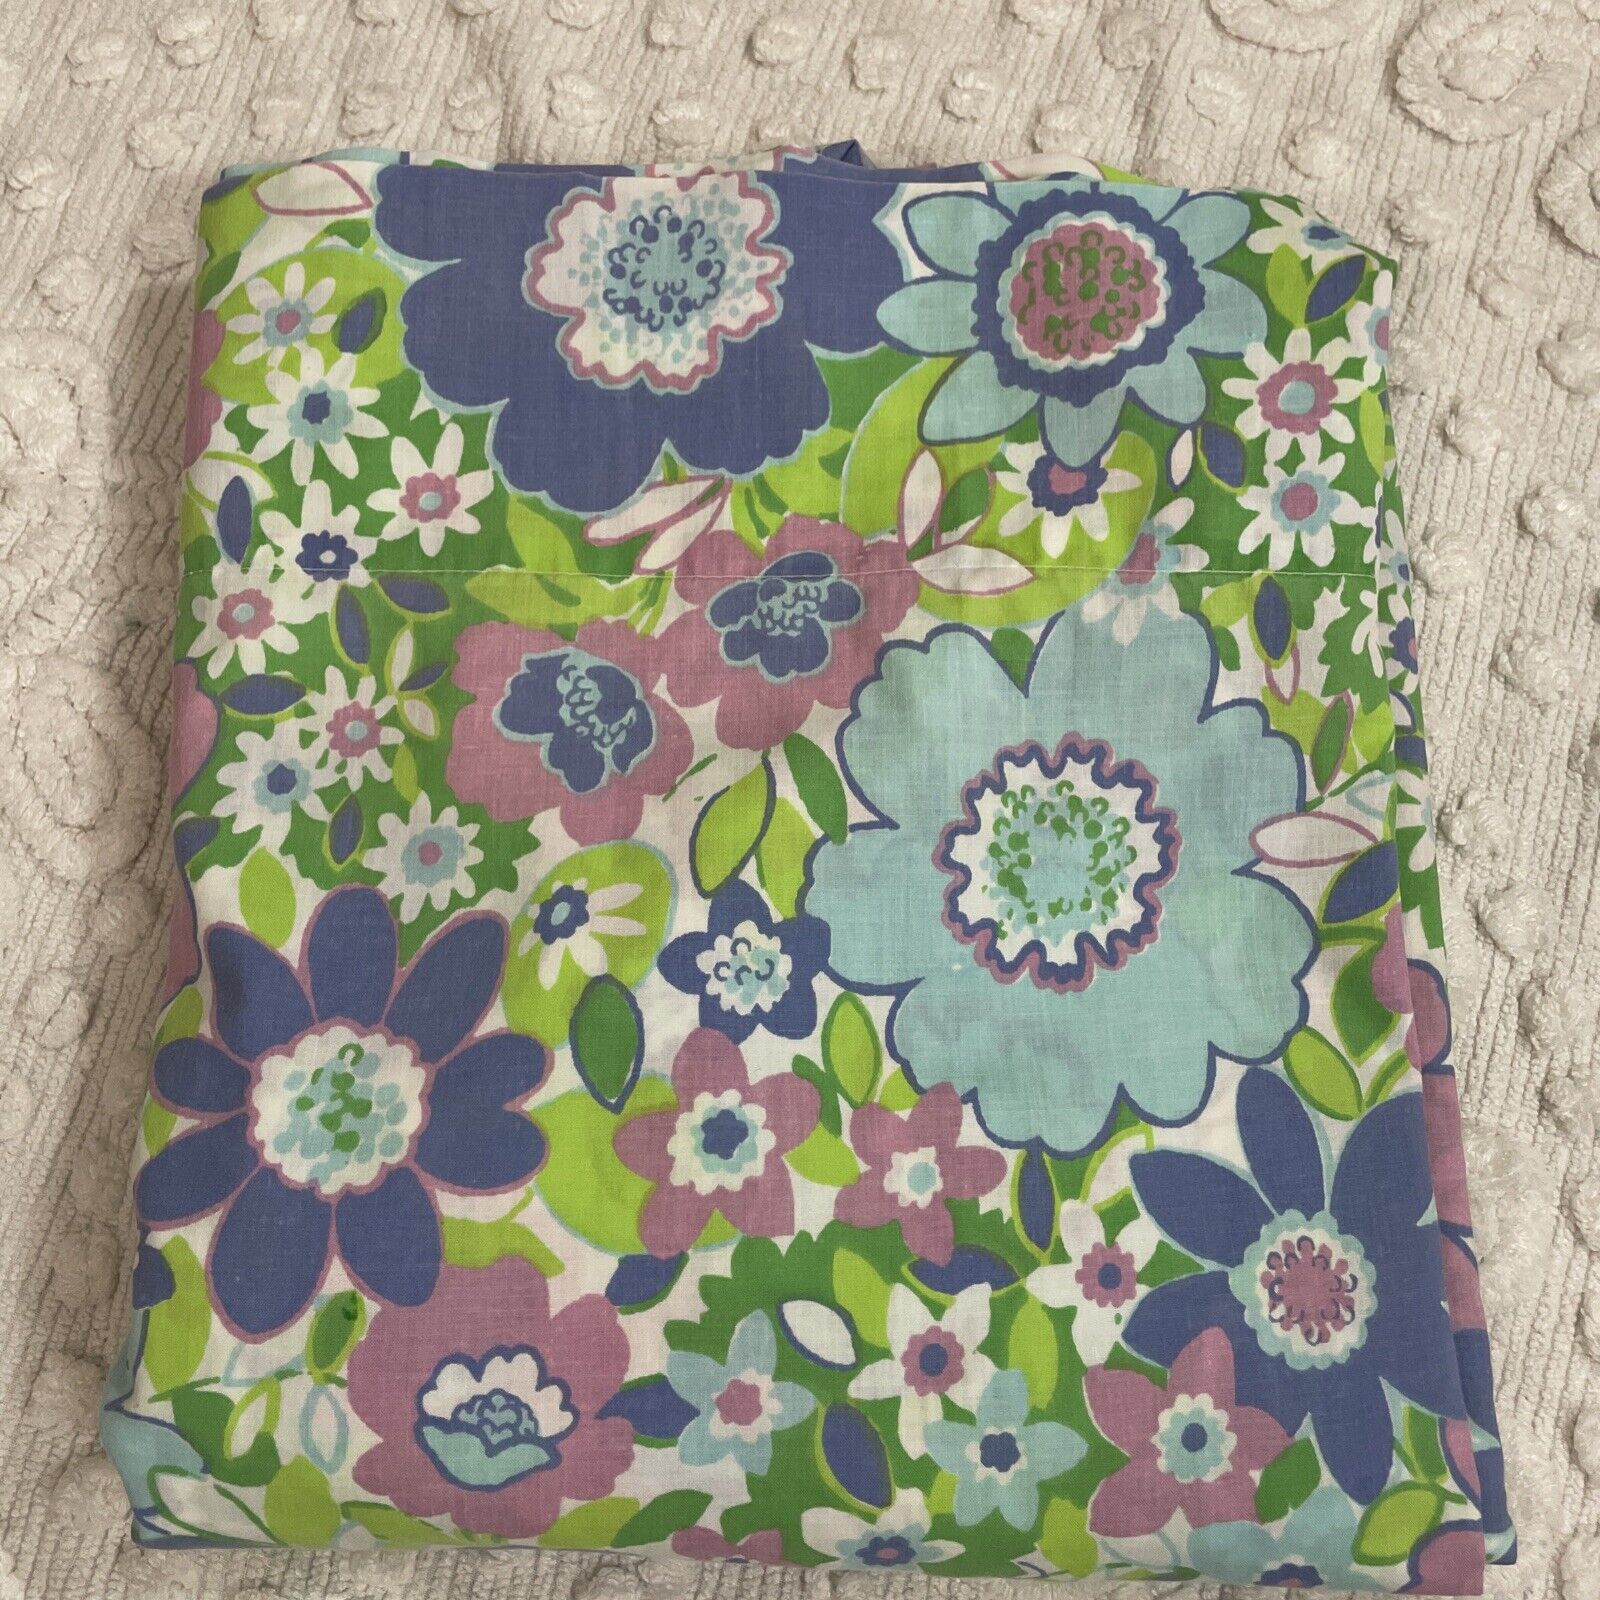 Vintage Floral Flat Sheet, Full,  Retro FlowerPower, Material 70’s Mod